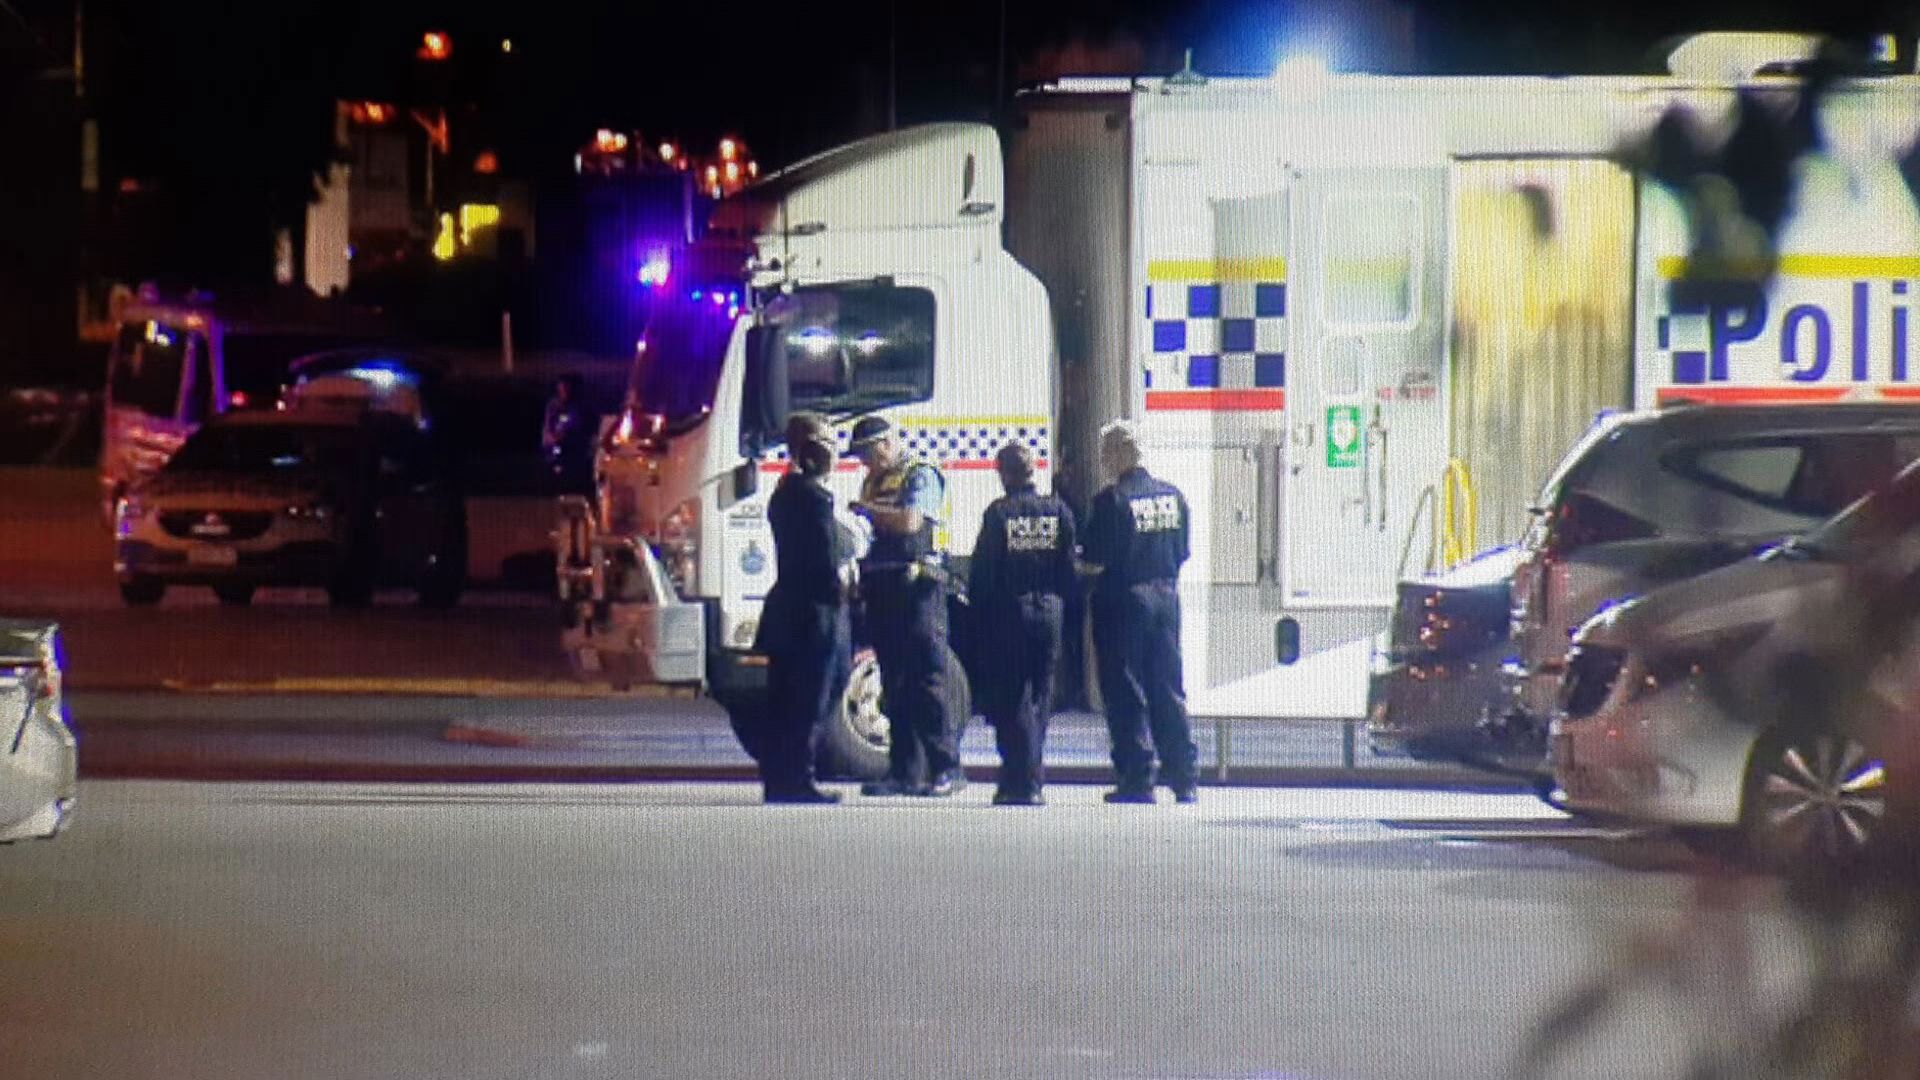 A police operation has been called off amid reports of a knife attack in Perth